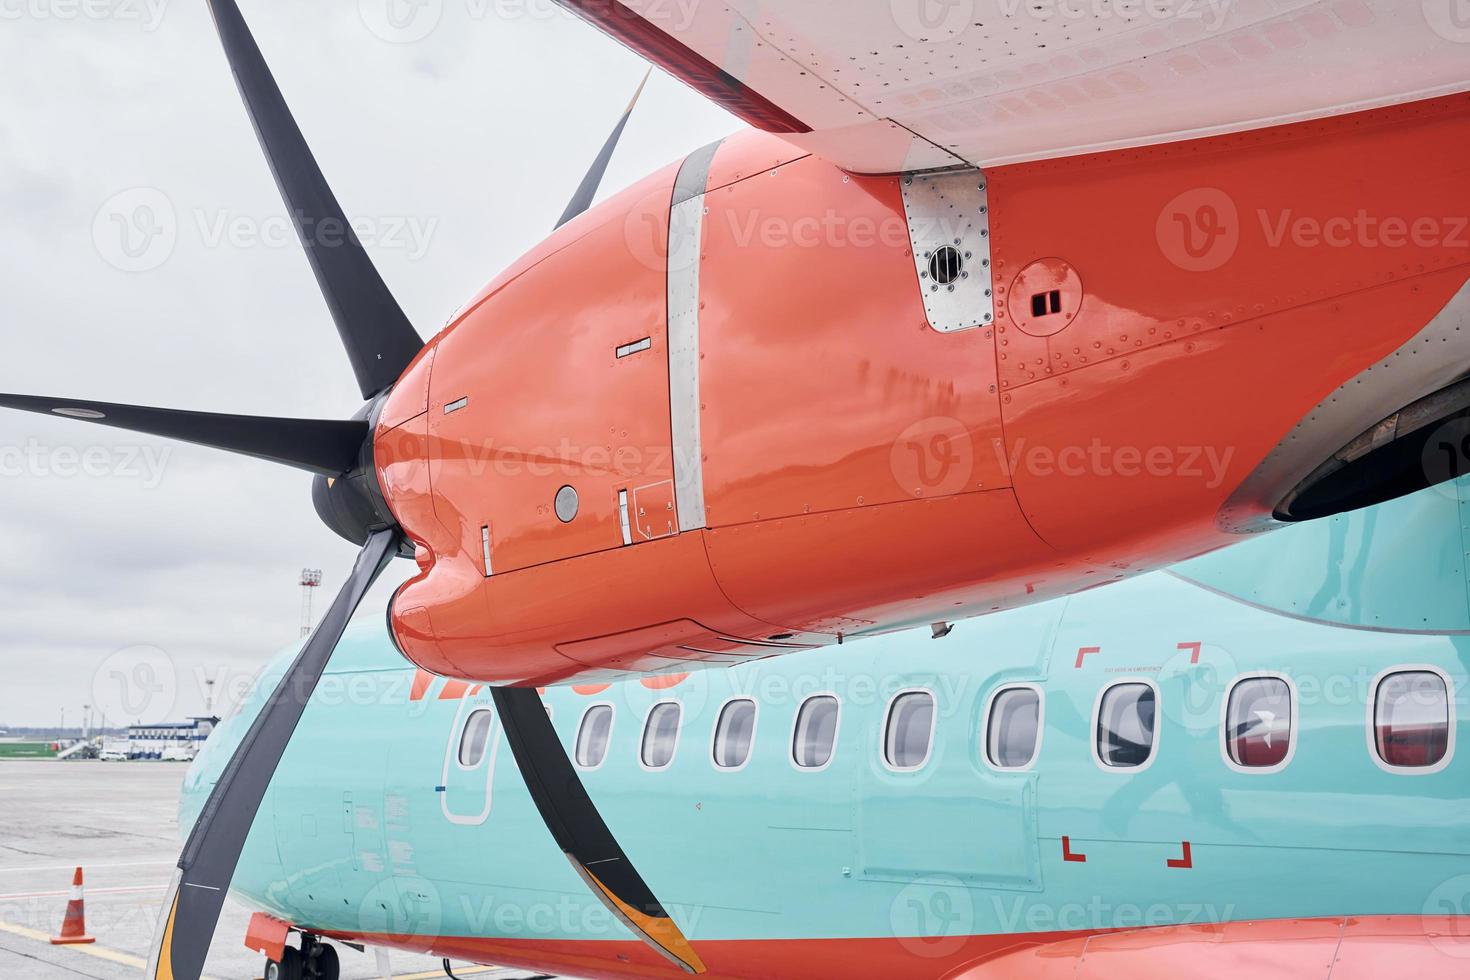 Orange and blue colored. Turboprop aircraft parked on the runway at daytime photo